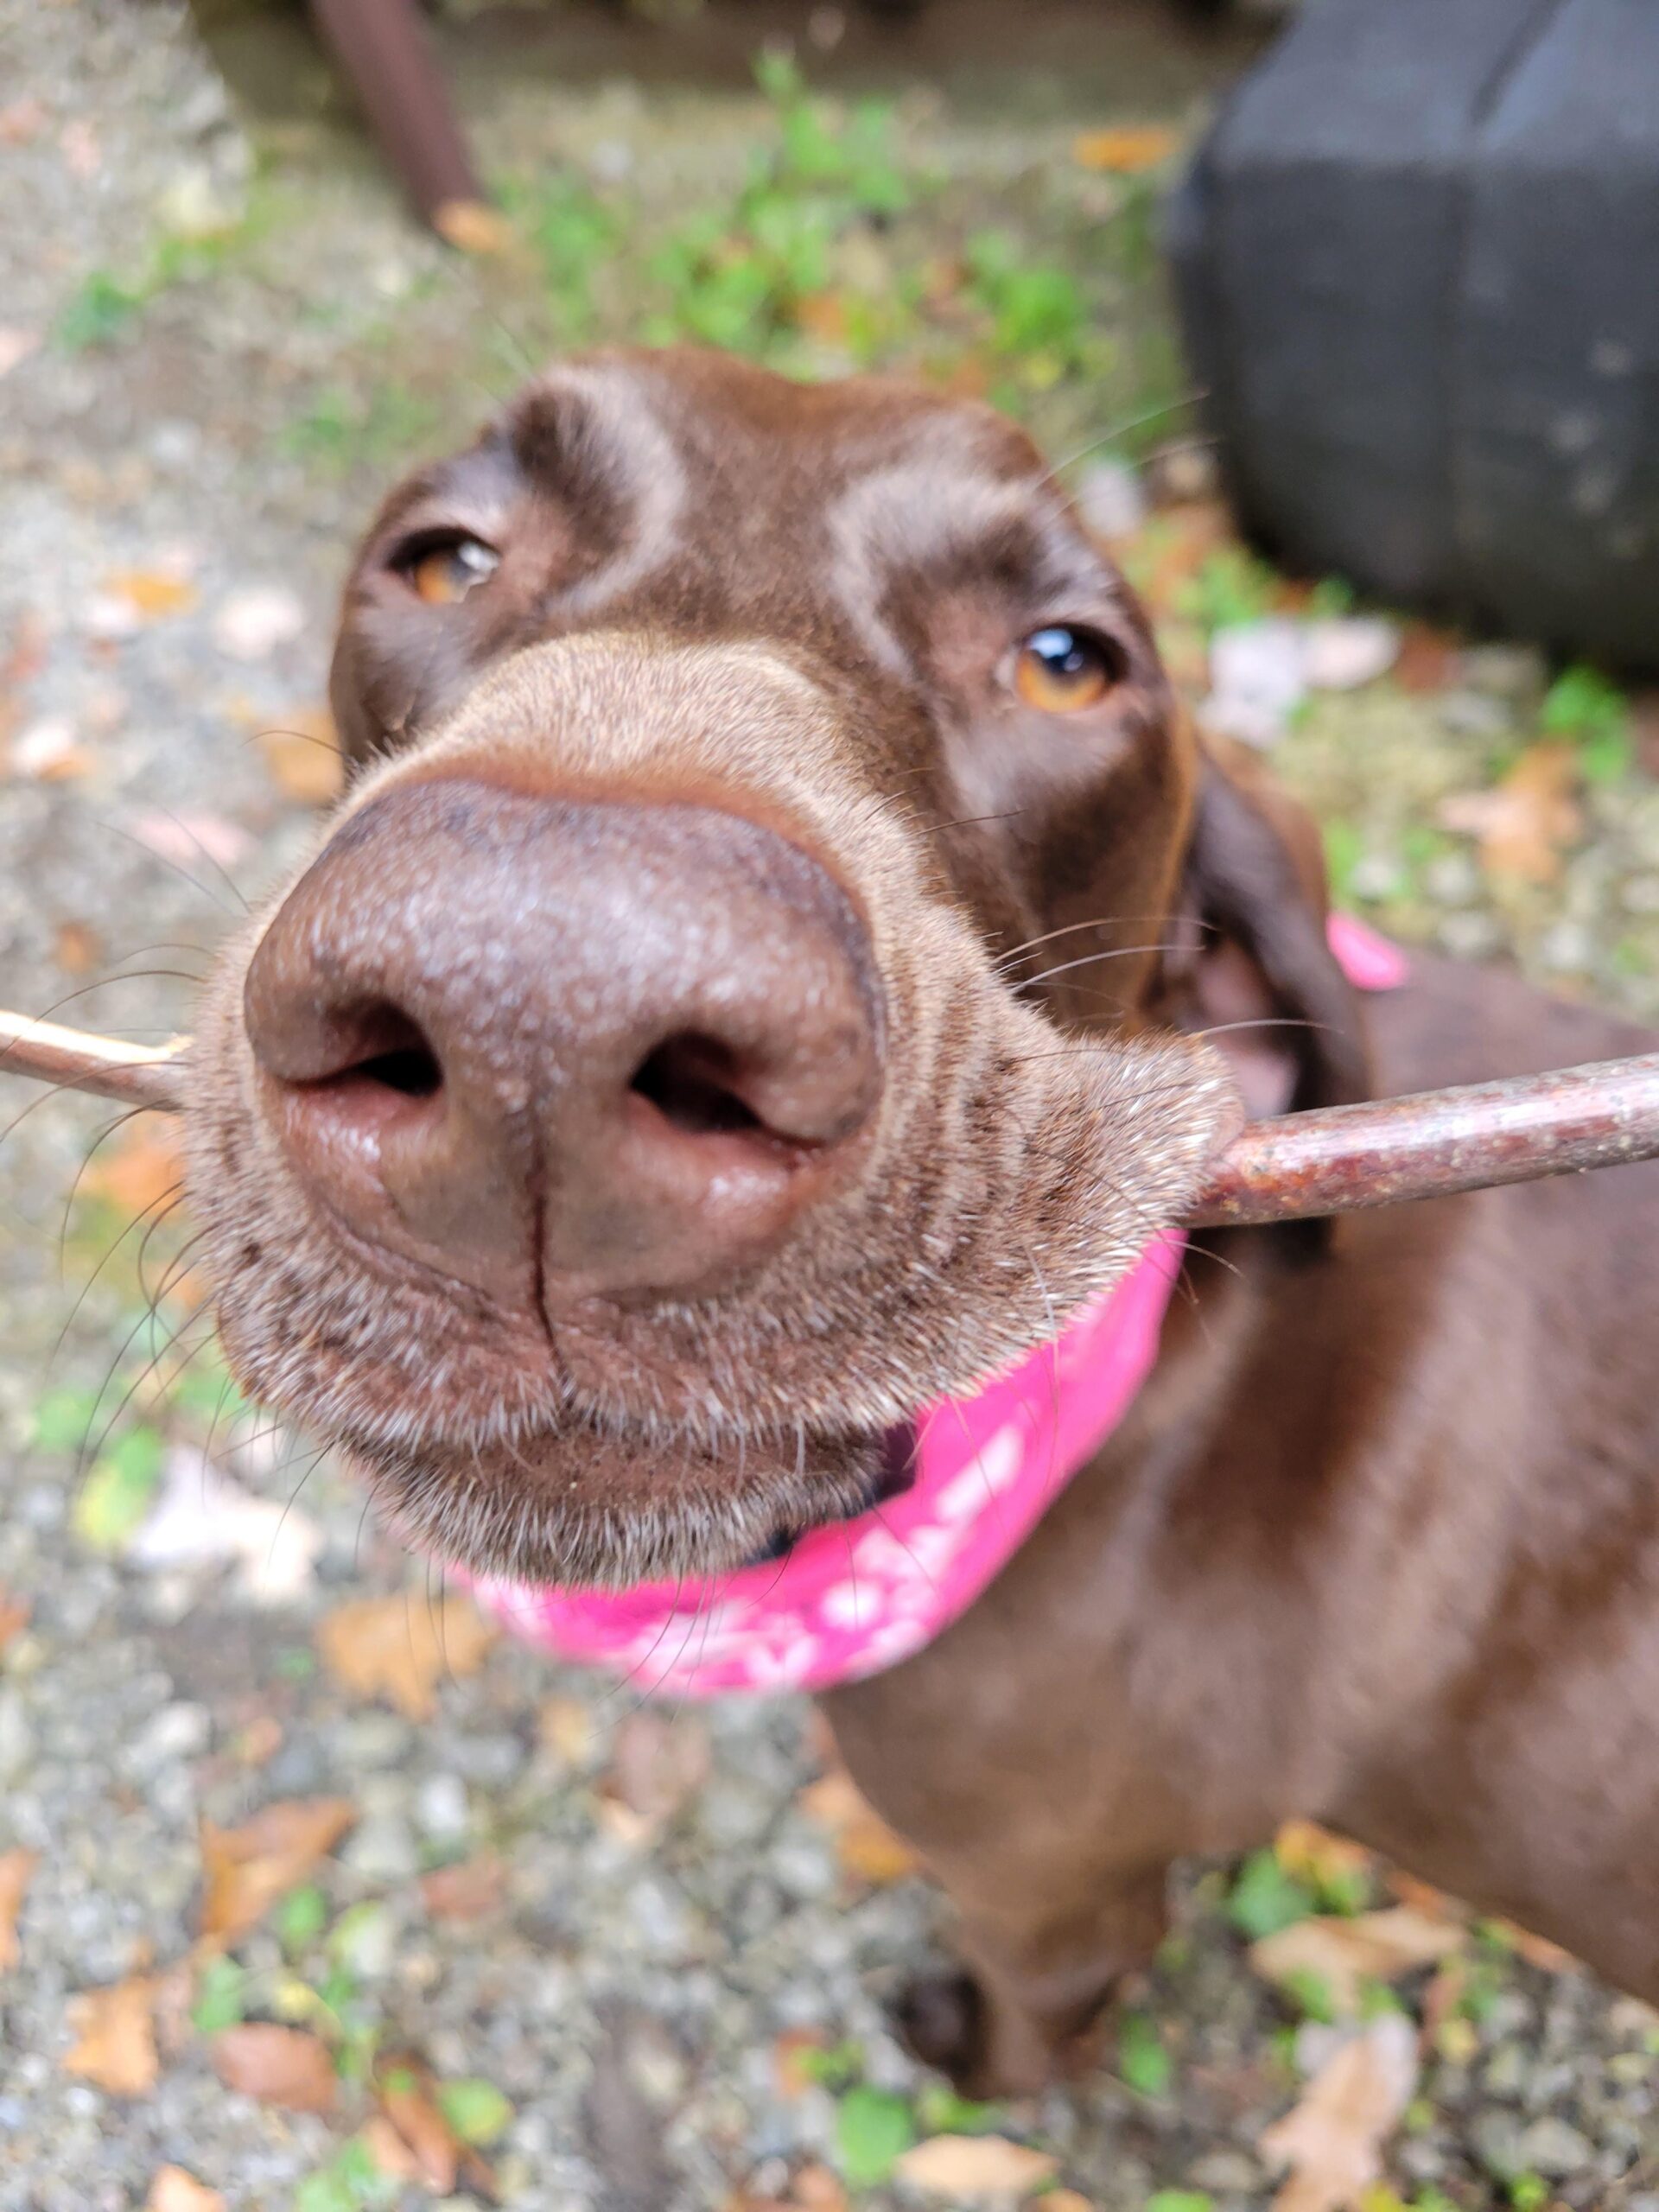 When sticks are existence, but you still need butt scritches